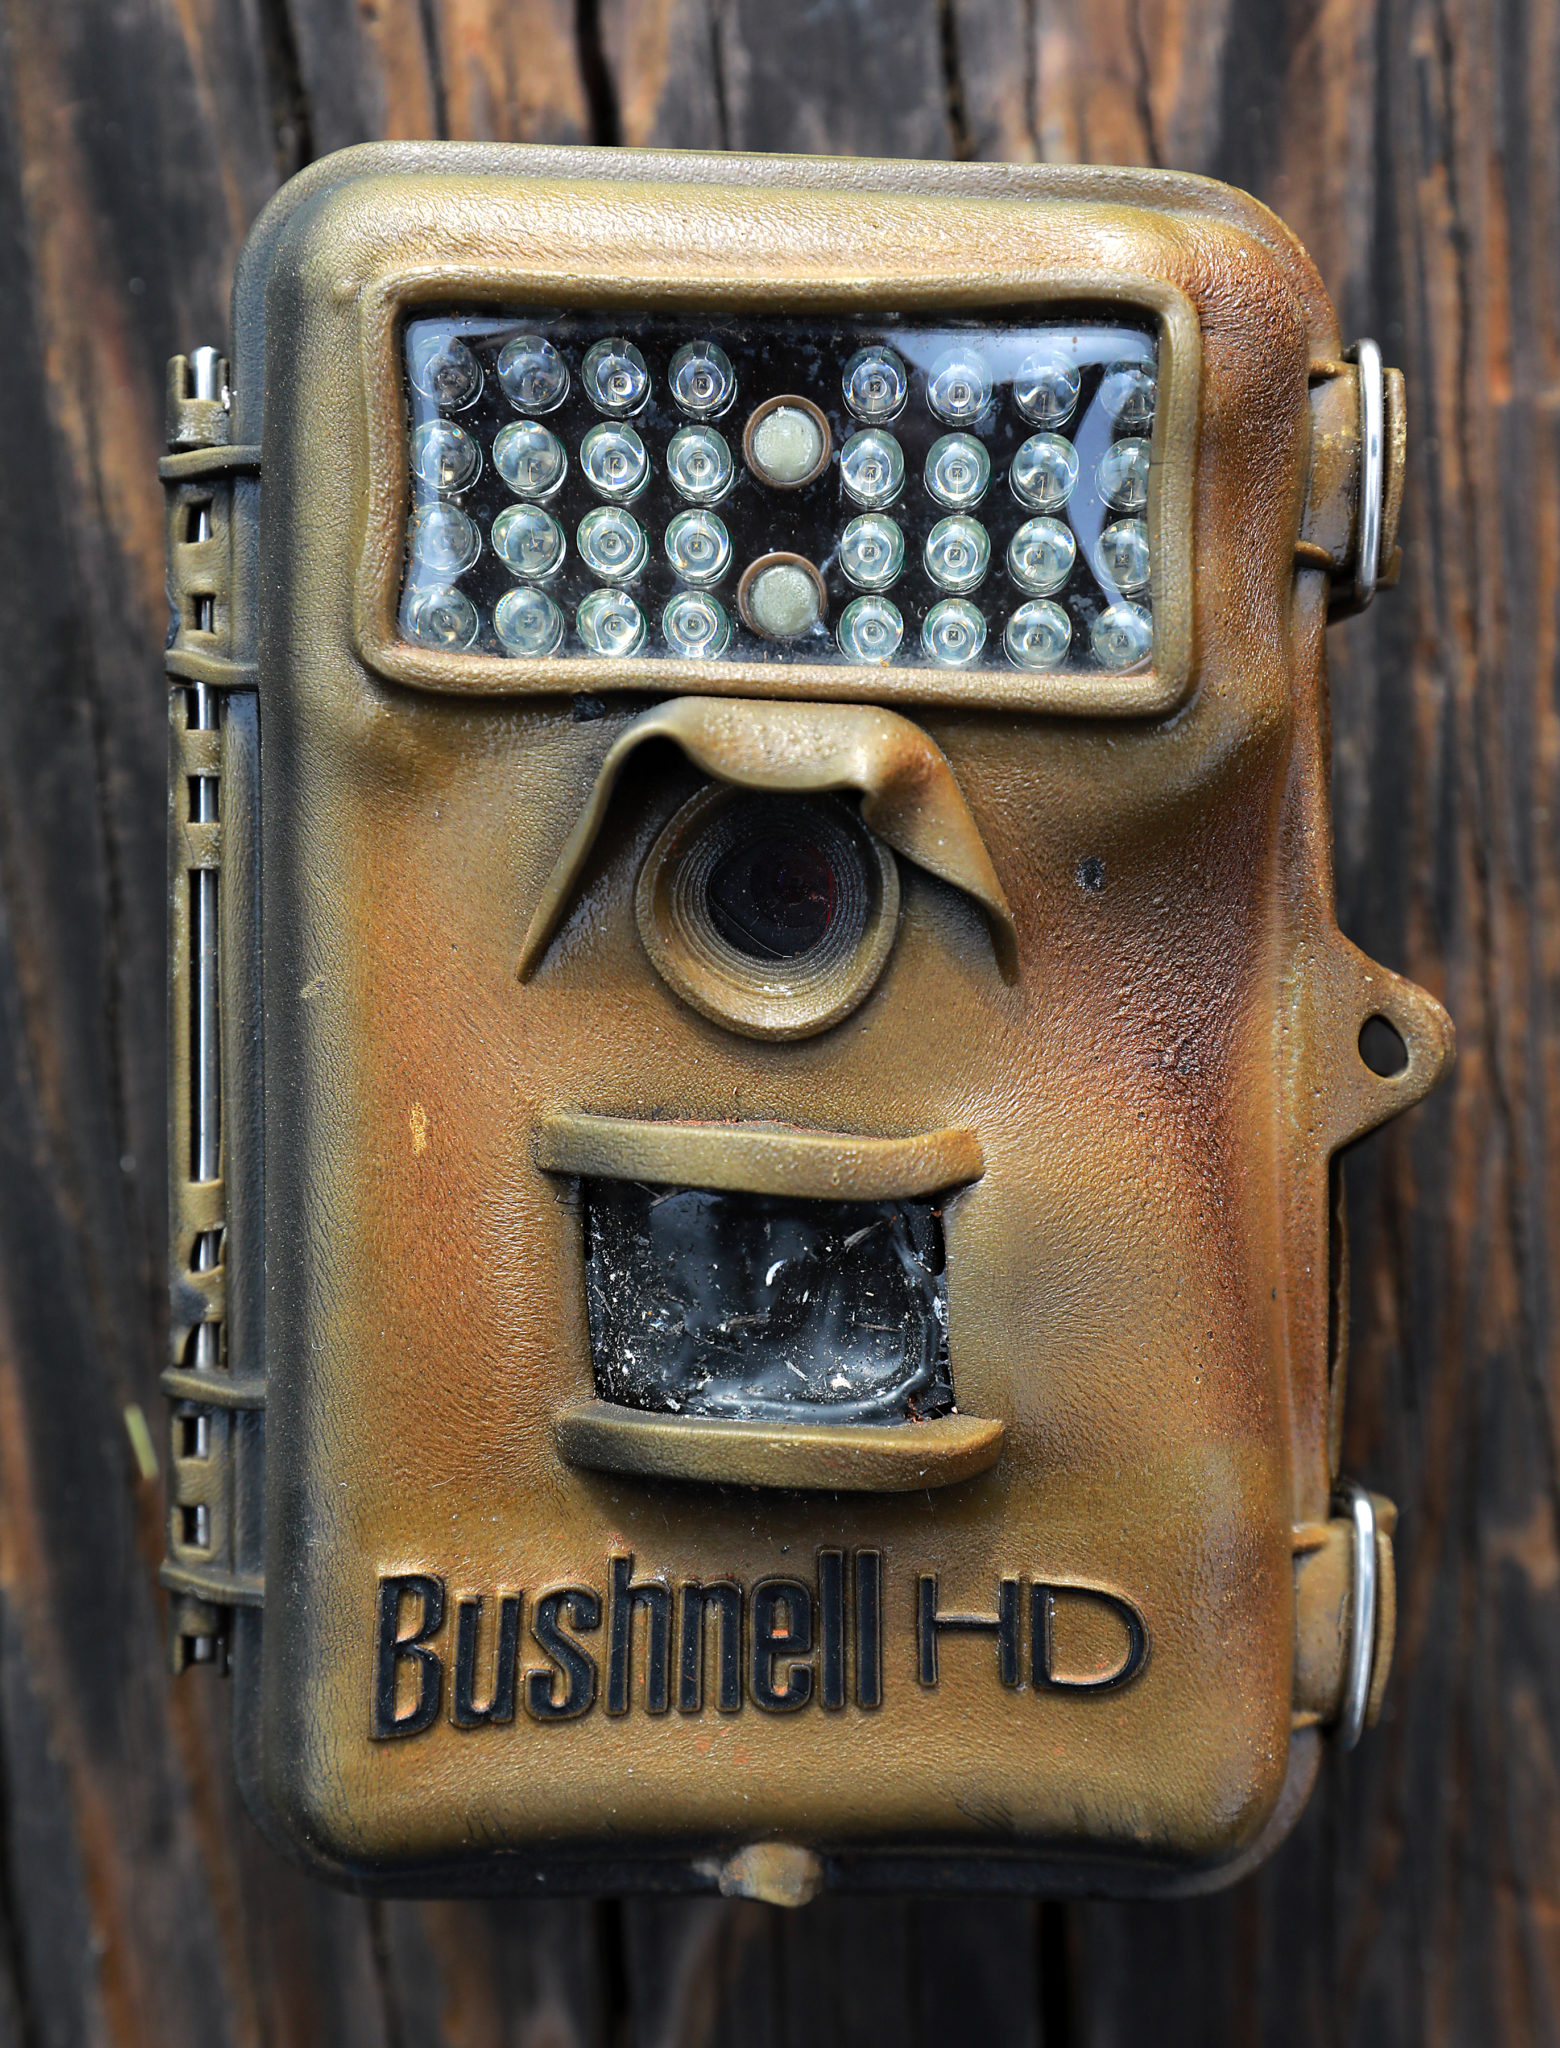 One of the trail cameras destroyed by Tubbs fire on the Pepperwood Preserve northeast of Santa Rosa. (photo by John Burgess/The Press Democrat)